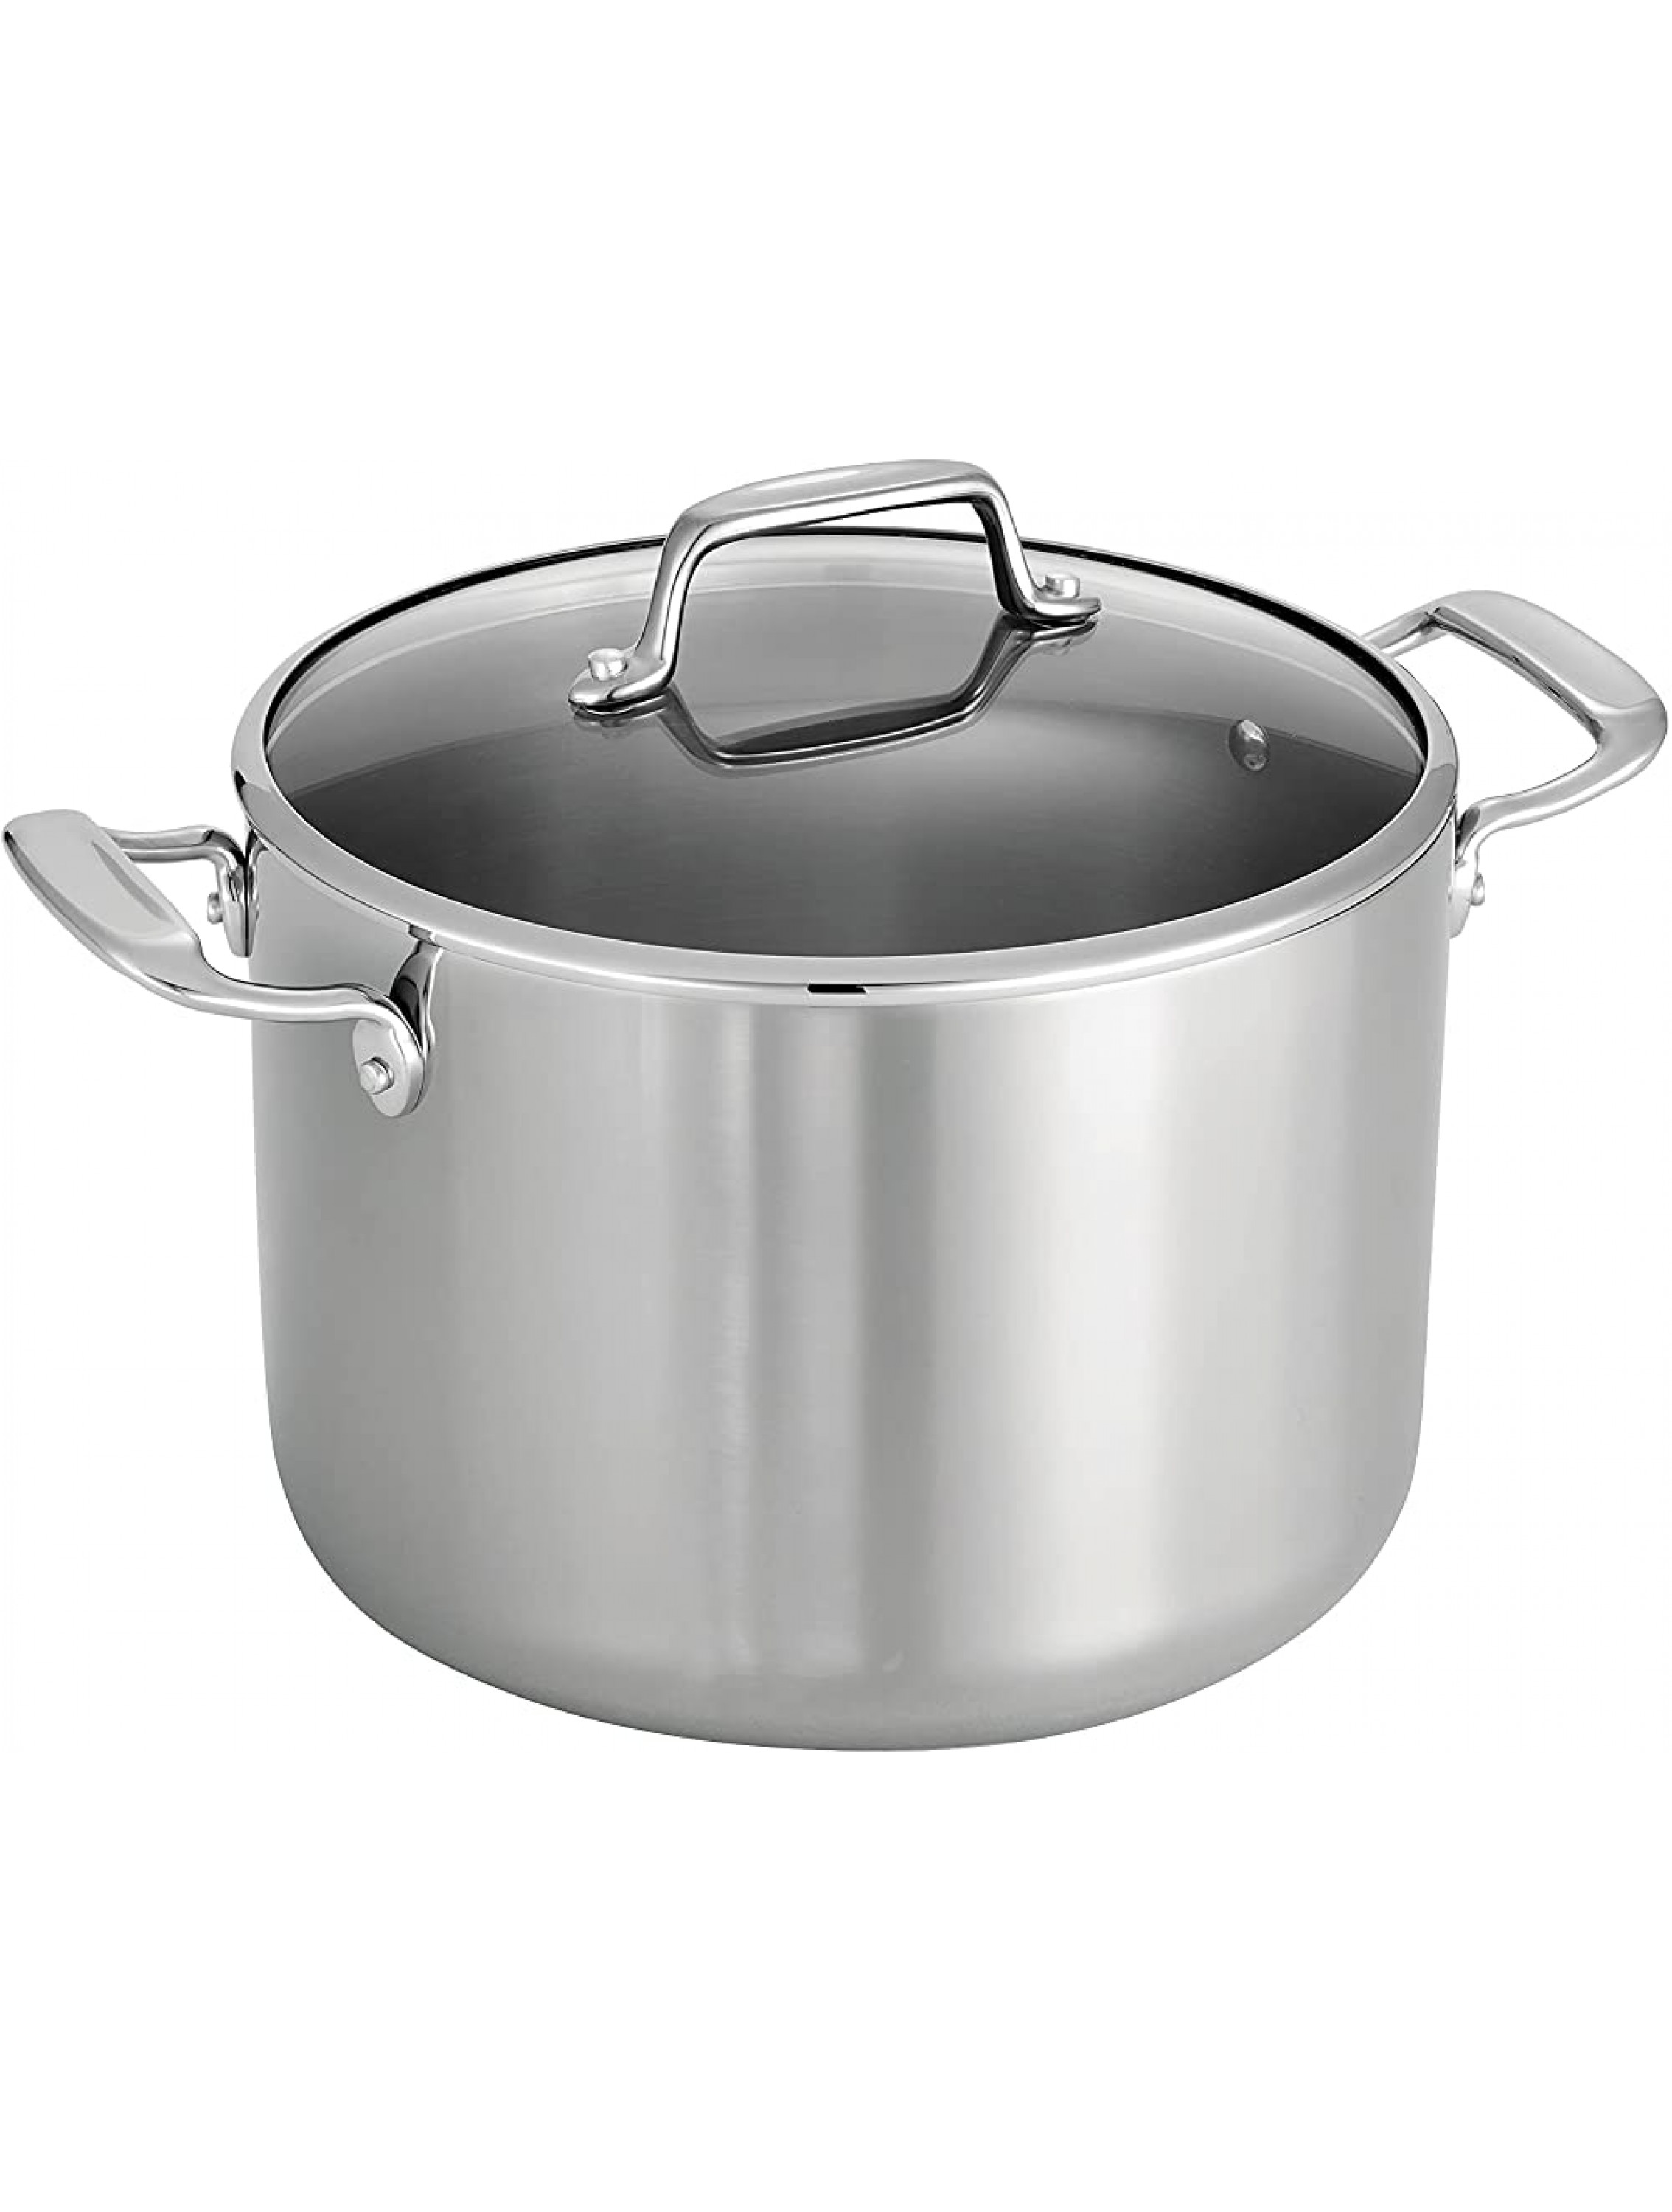 Tramontina Covered Stock Pot Tri-Ply Clad 8 Qt 80116 038DS - BUGYTWFO5